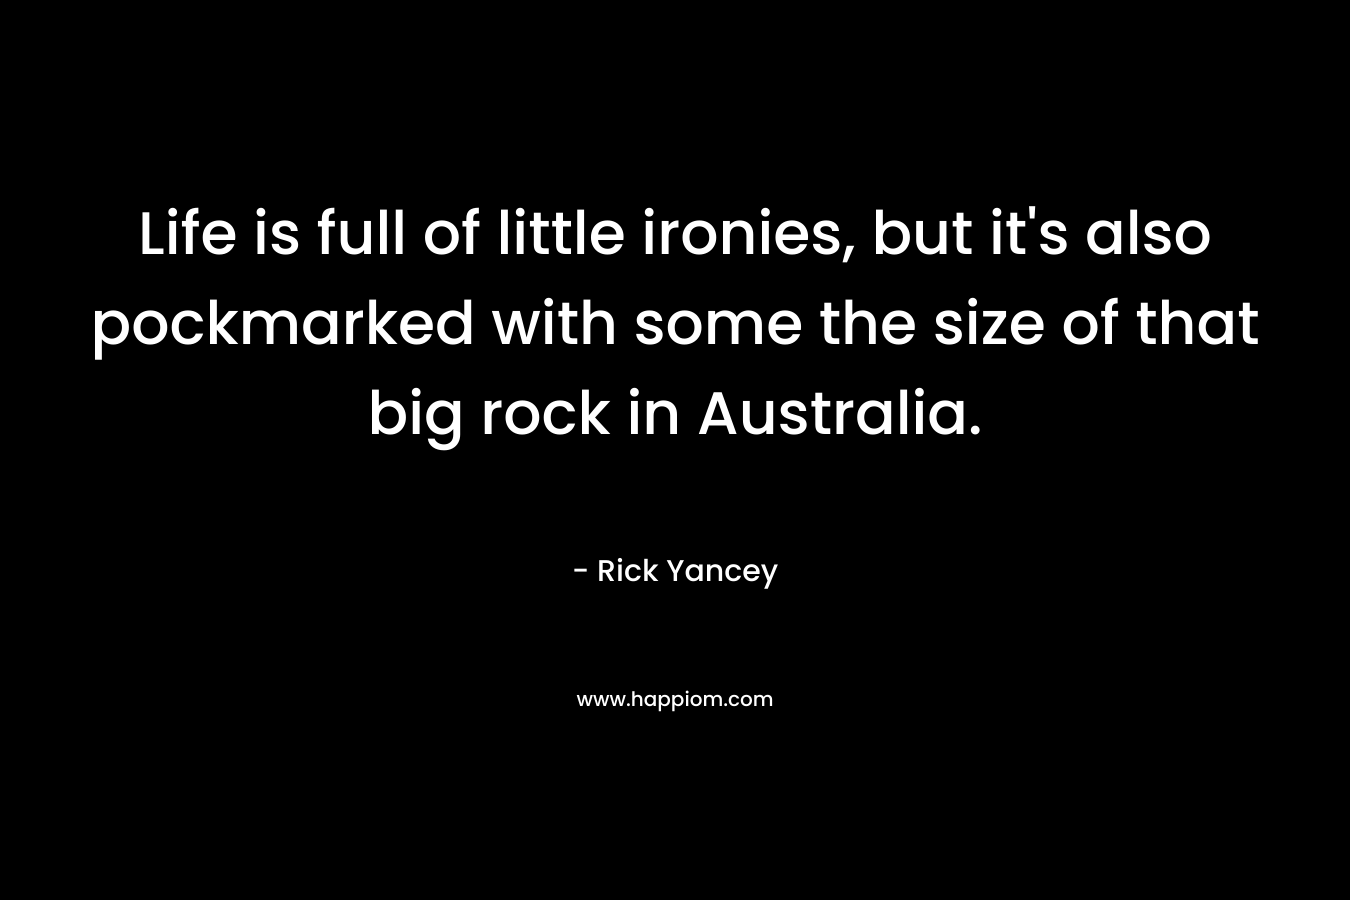 Life is full of little ironies, but it’s also pockmarked with some the size of that big rock in Australia. – Rick Yancey